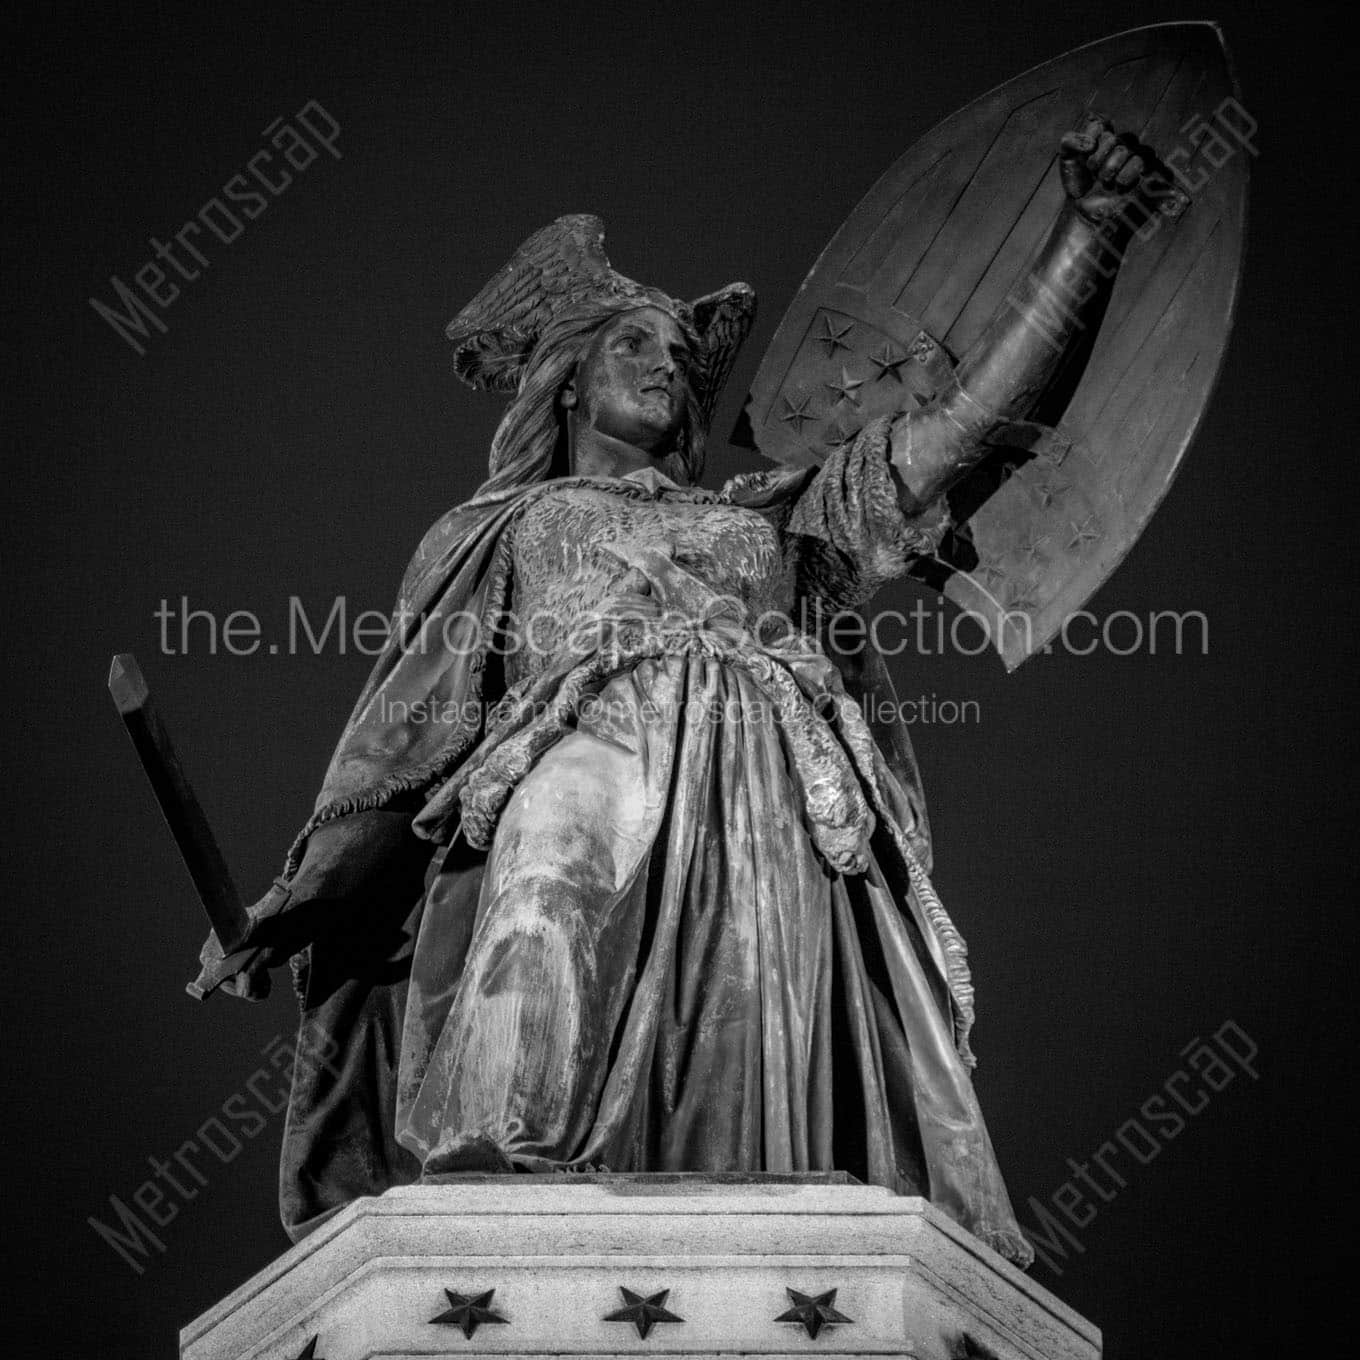 michigania soldiers sailors monument Black & White Wall Art